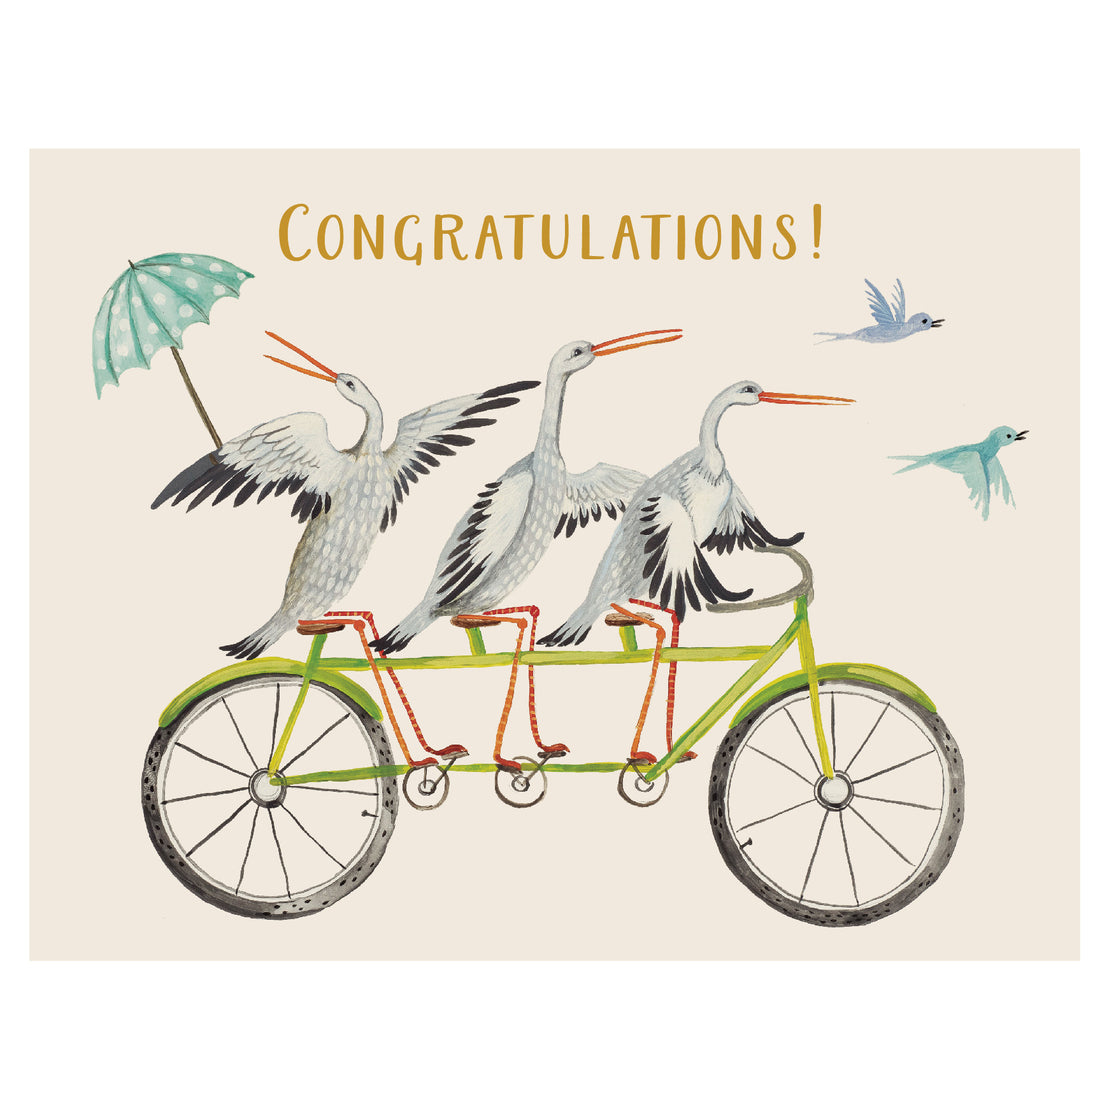 A whimsical illustration of three white and black storks riding on a green tandem bicycle over a beige background, with &quot;CONGRATULATIONS!&quot; printed in gold across the top of the card.